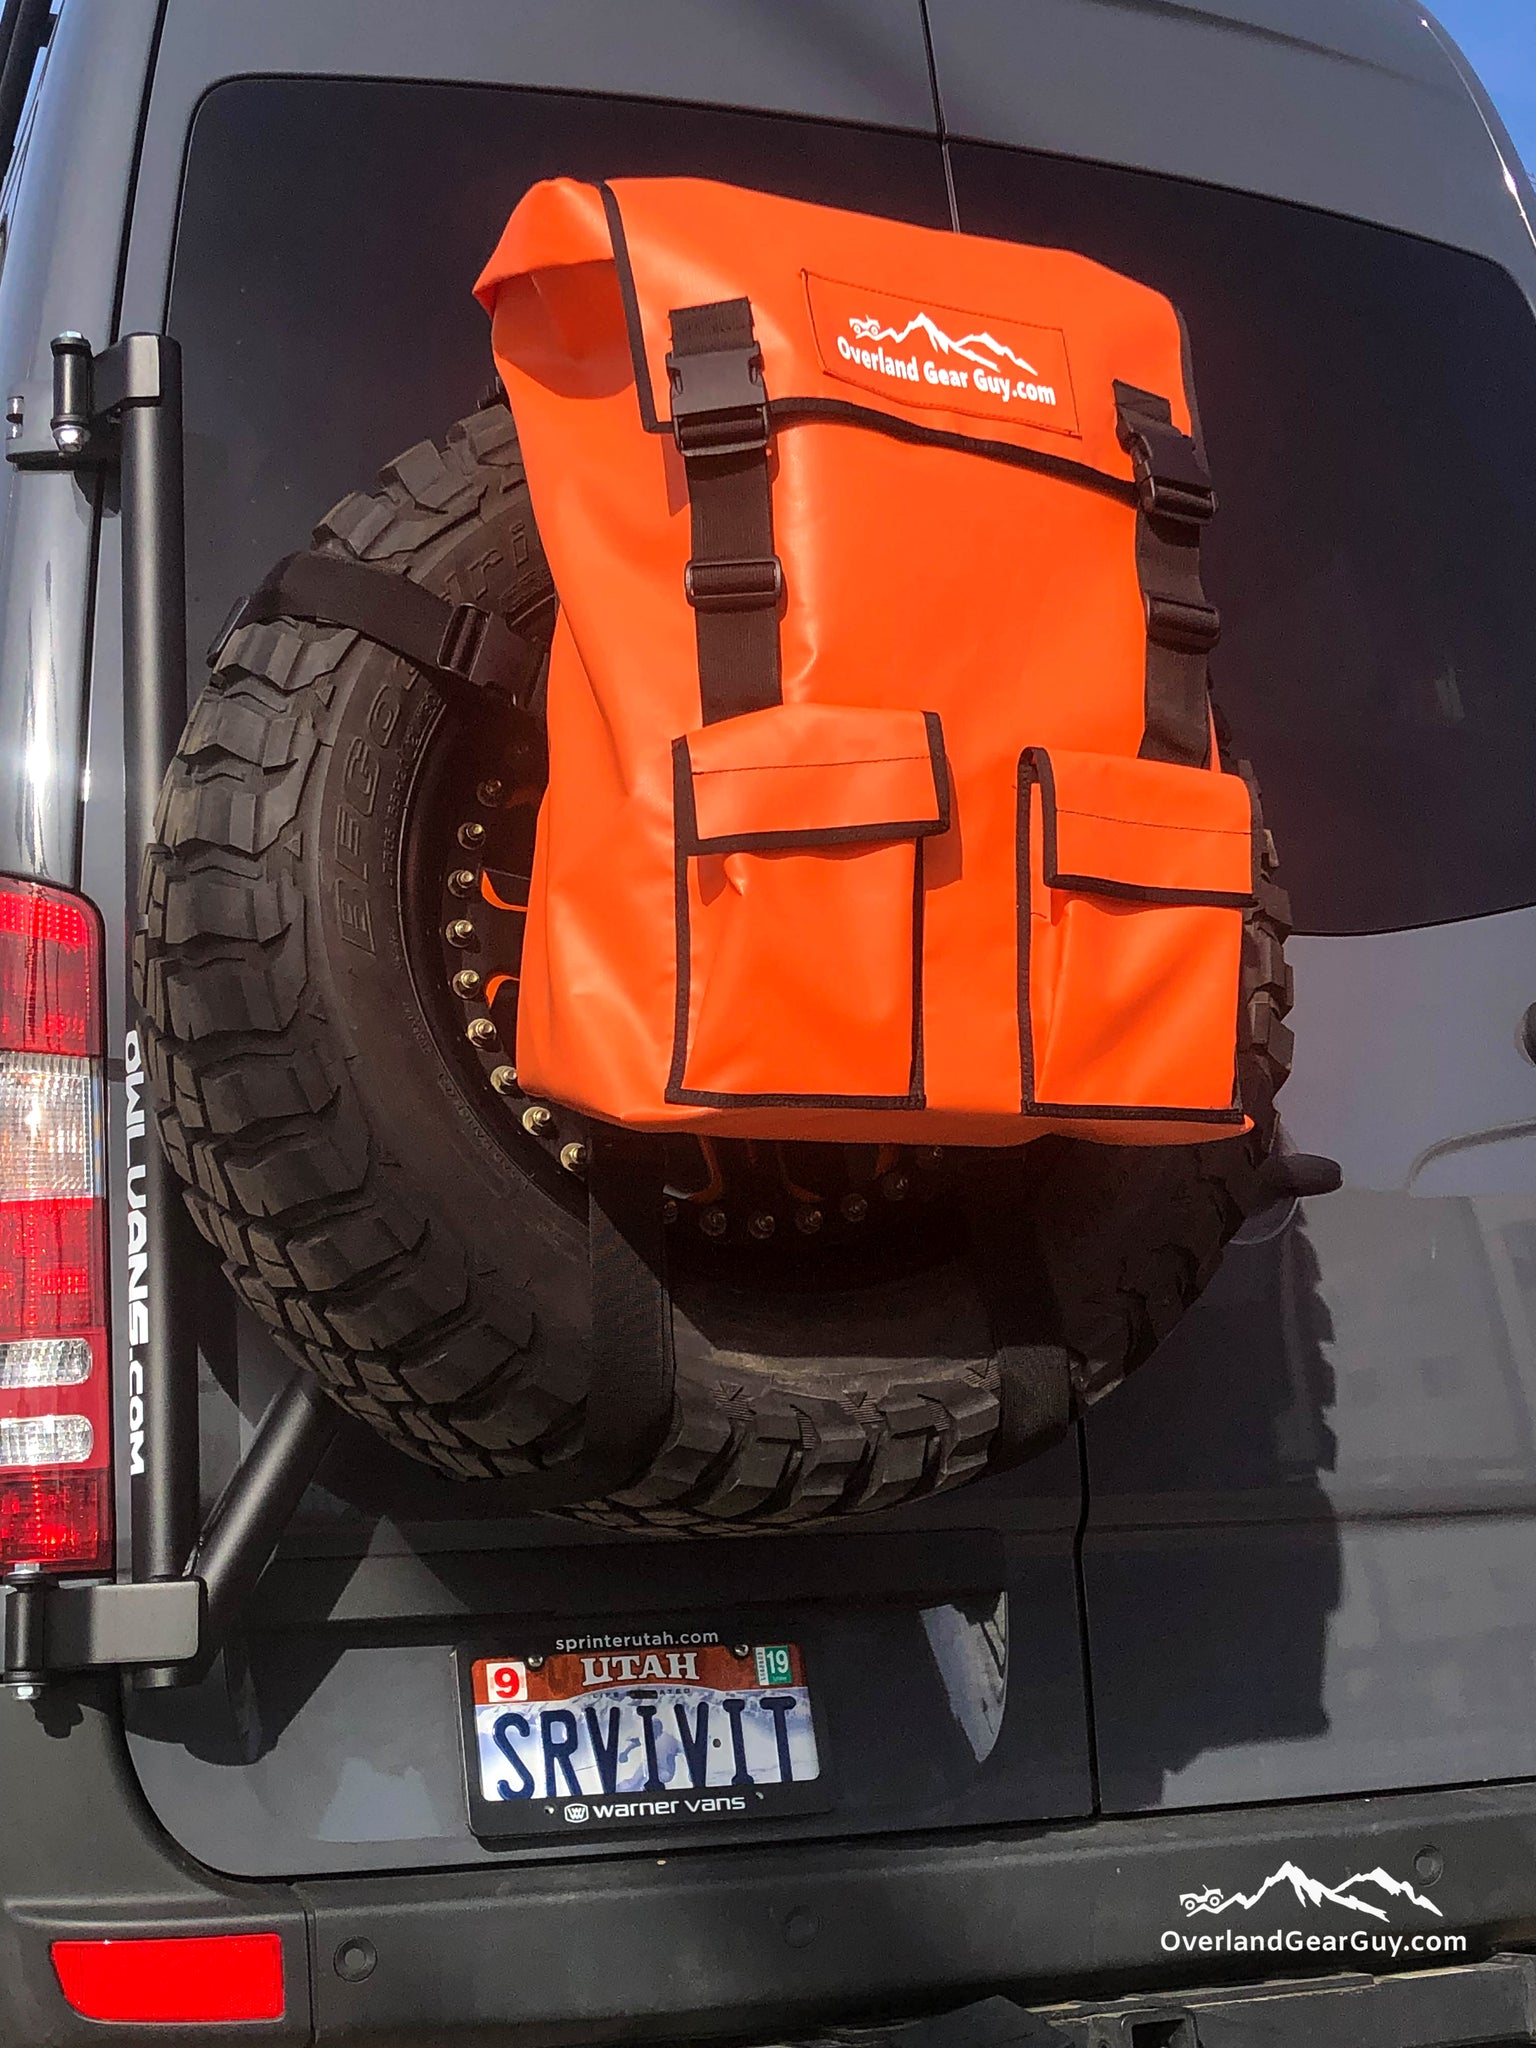 Overland Vehicle Systems RalliTEK Edition XL Trash Bag with Tire Mount